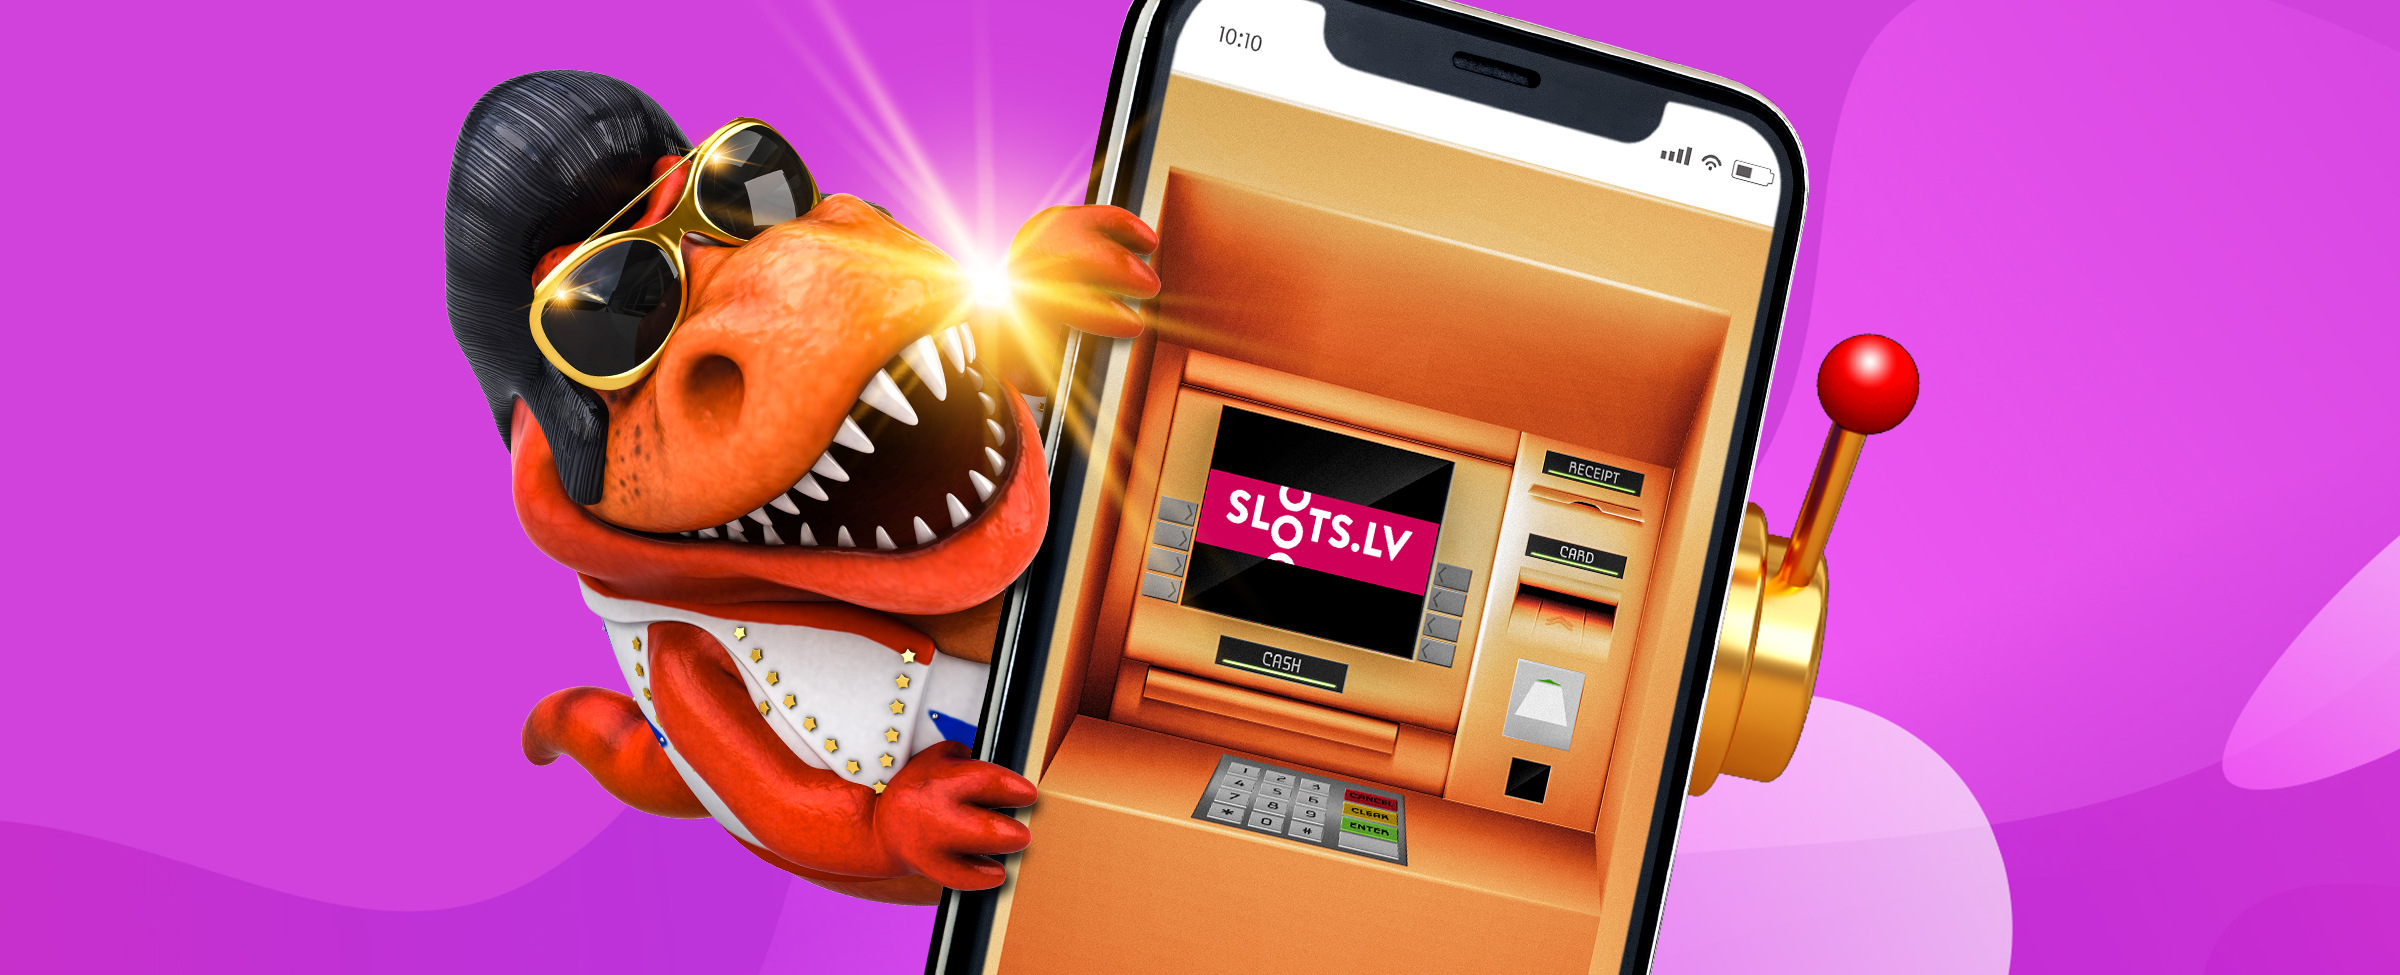 A cartoon character of a dinosaur dressed in an Elvis costume holding an oversized mobile phone showing a slot machine with the SlotsLV logo on the screen